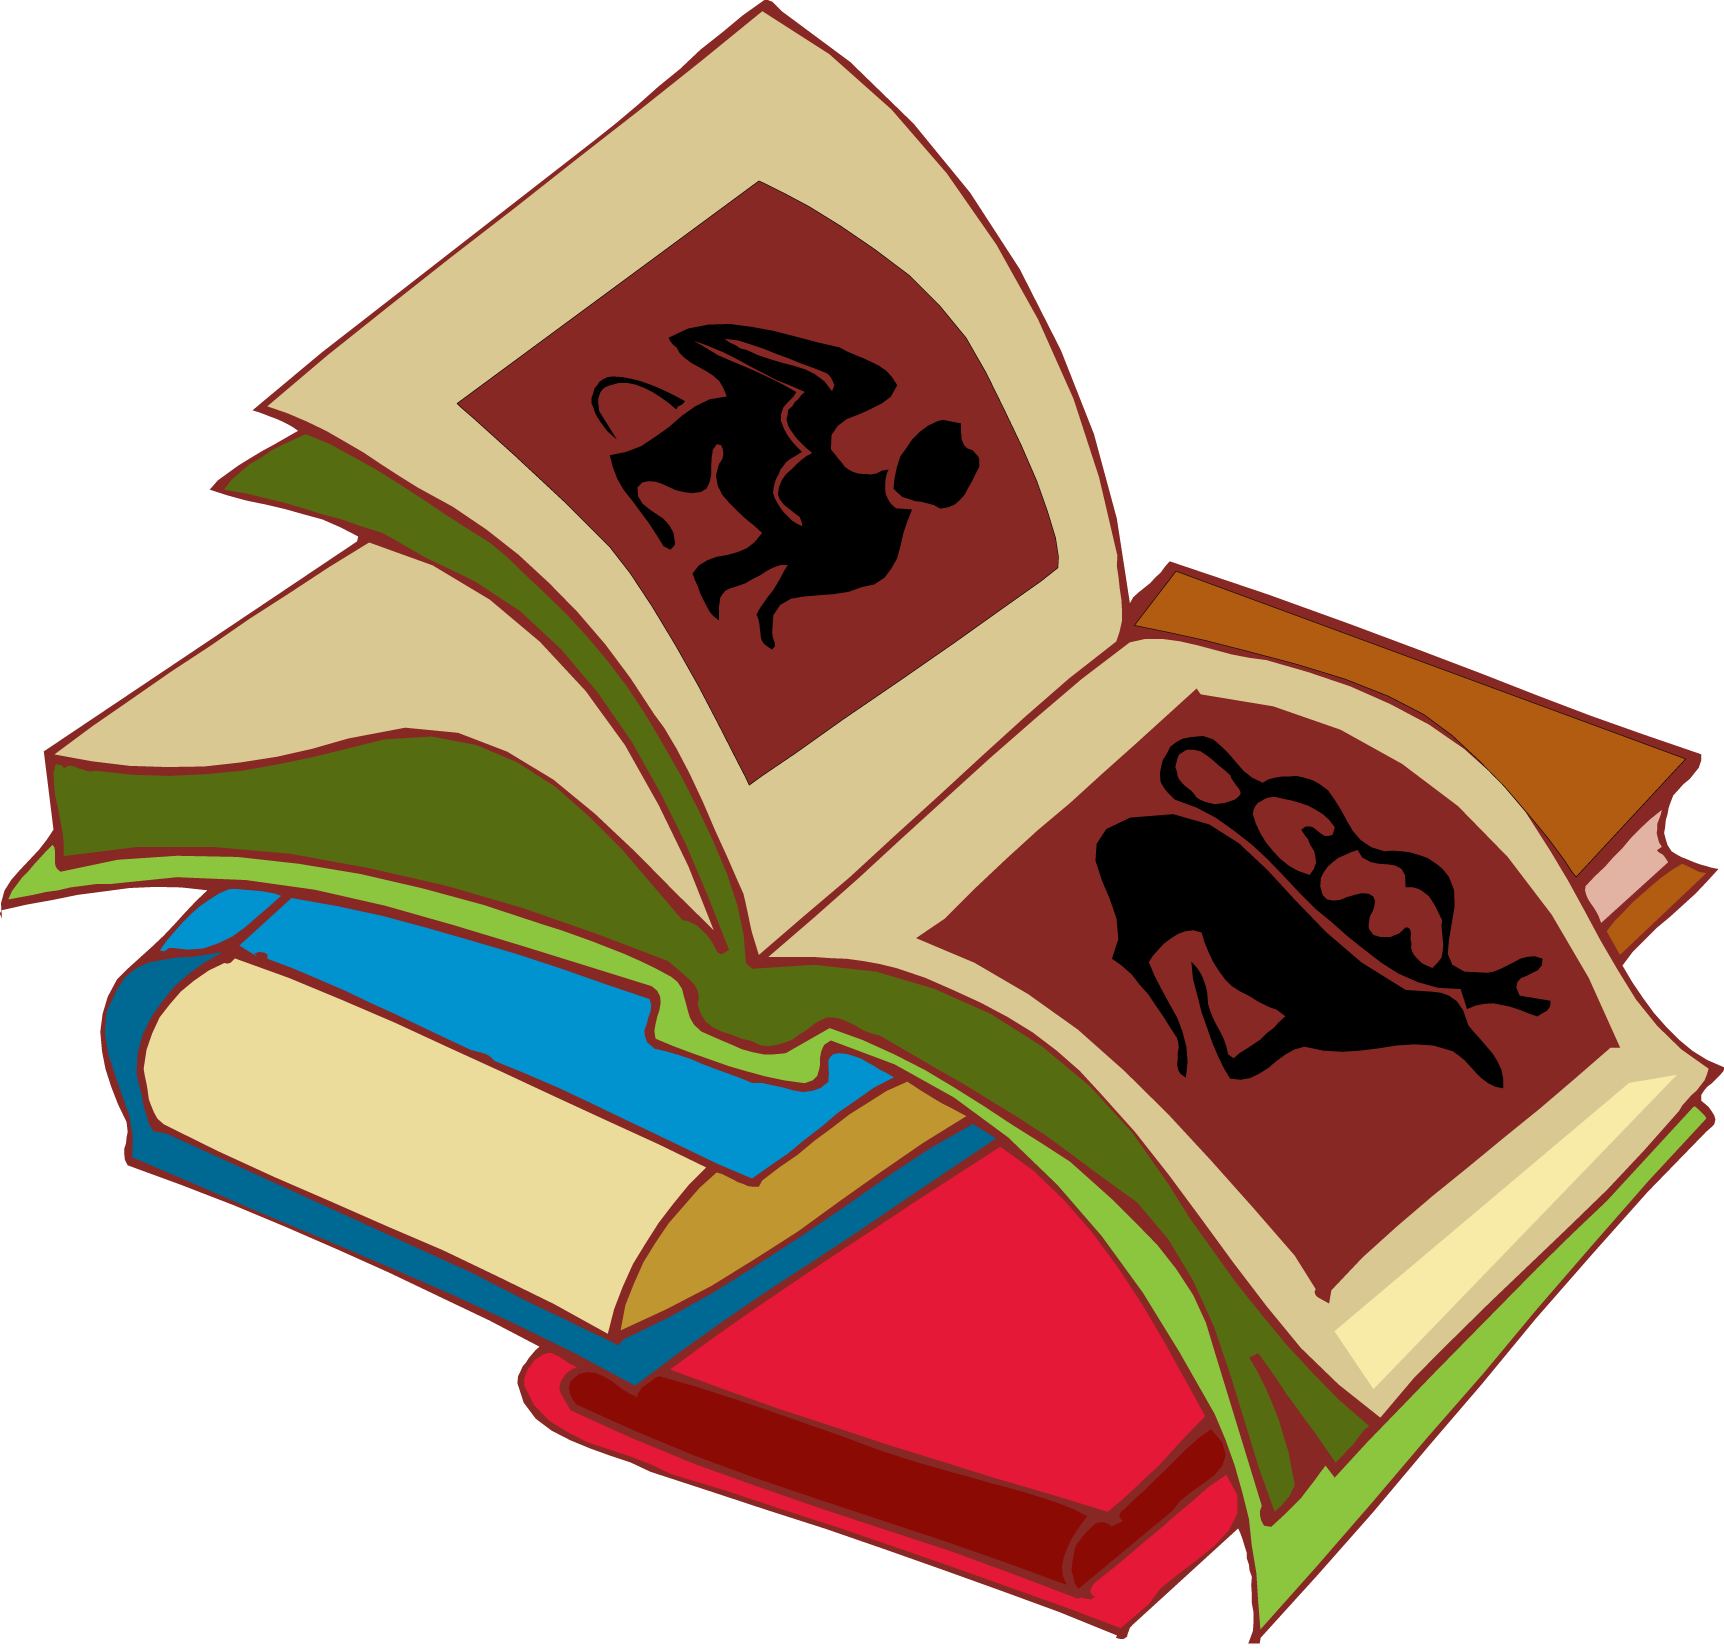 Stack Of Books Clipart Clipart